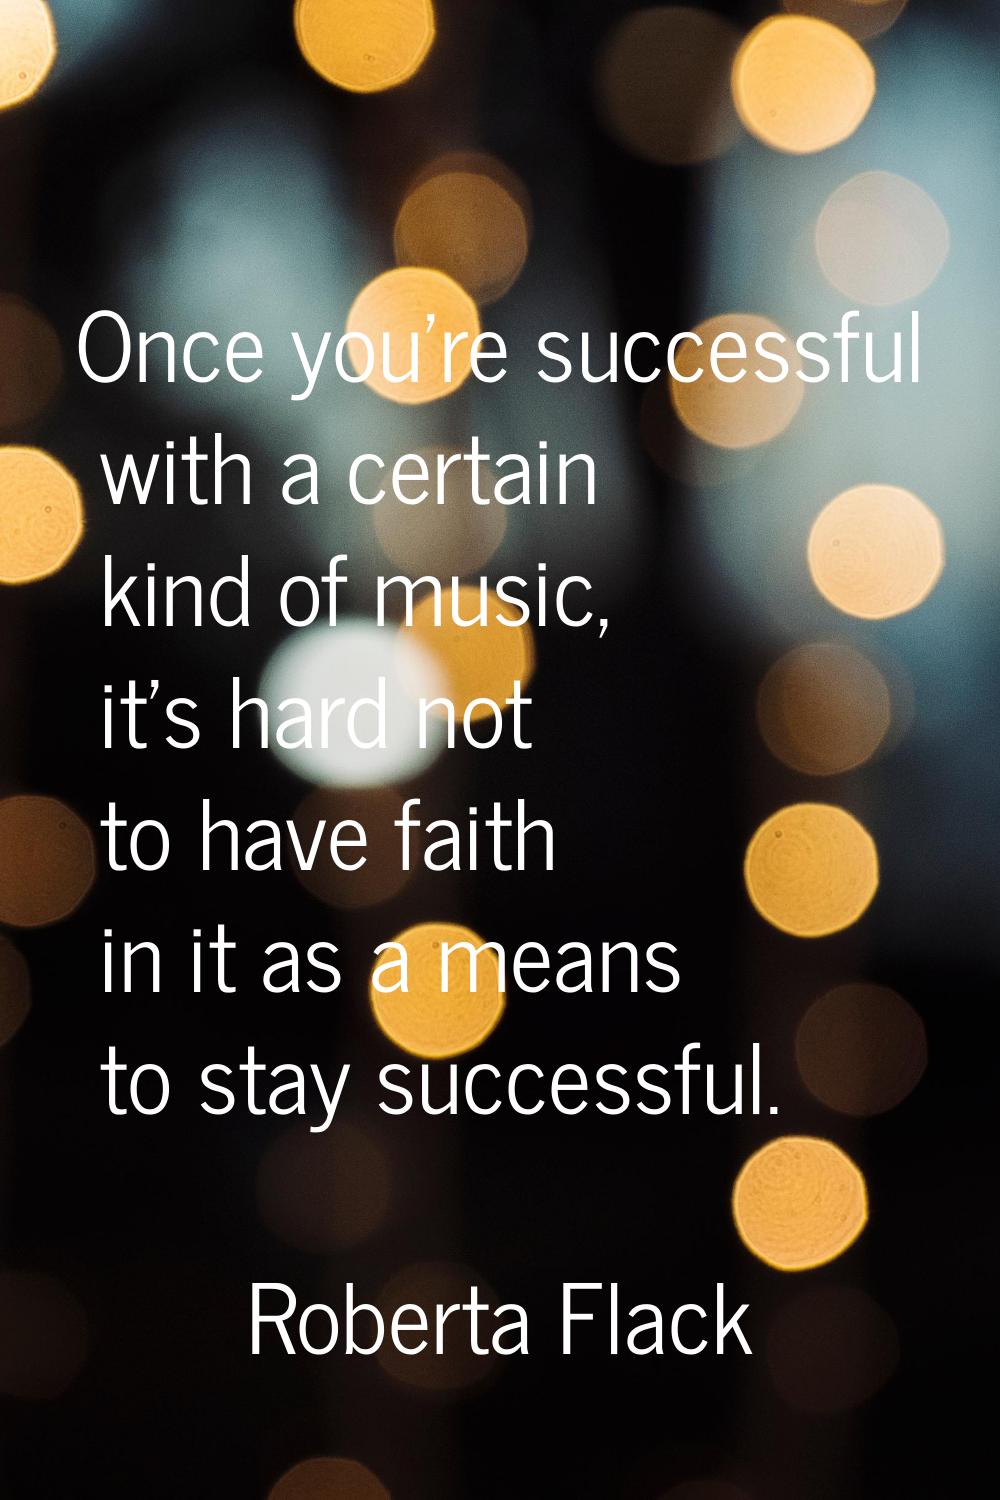 Once you're successful with a certain kind of music, it's hard not to have faith in it as a means t